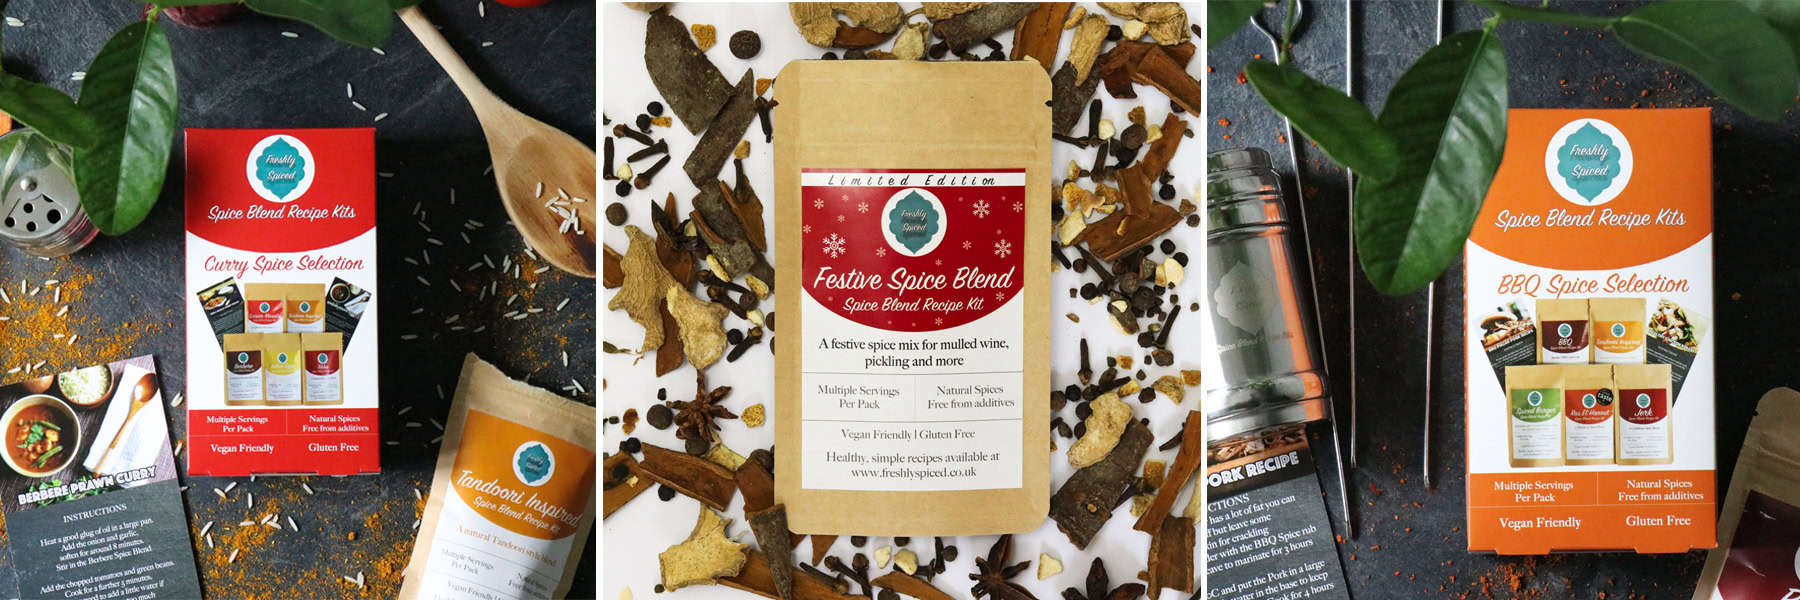 Festive Spice Blend & other Sweet Spices